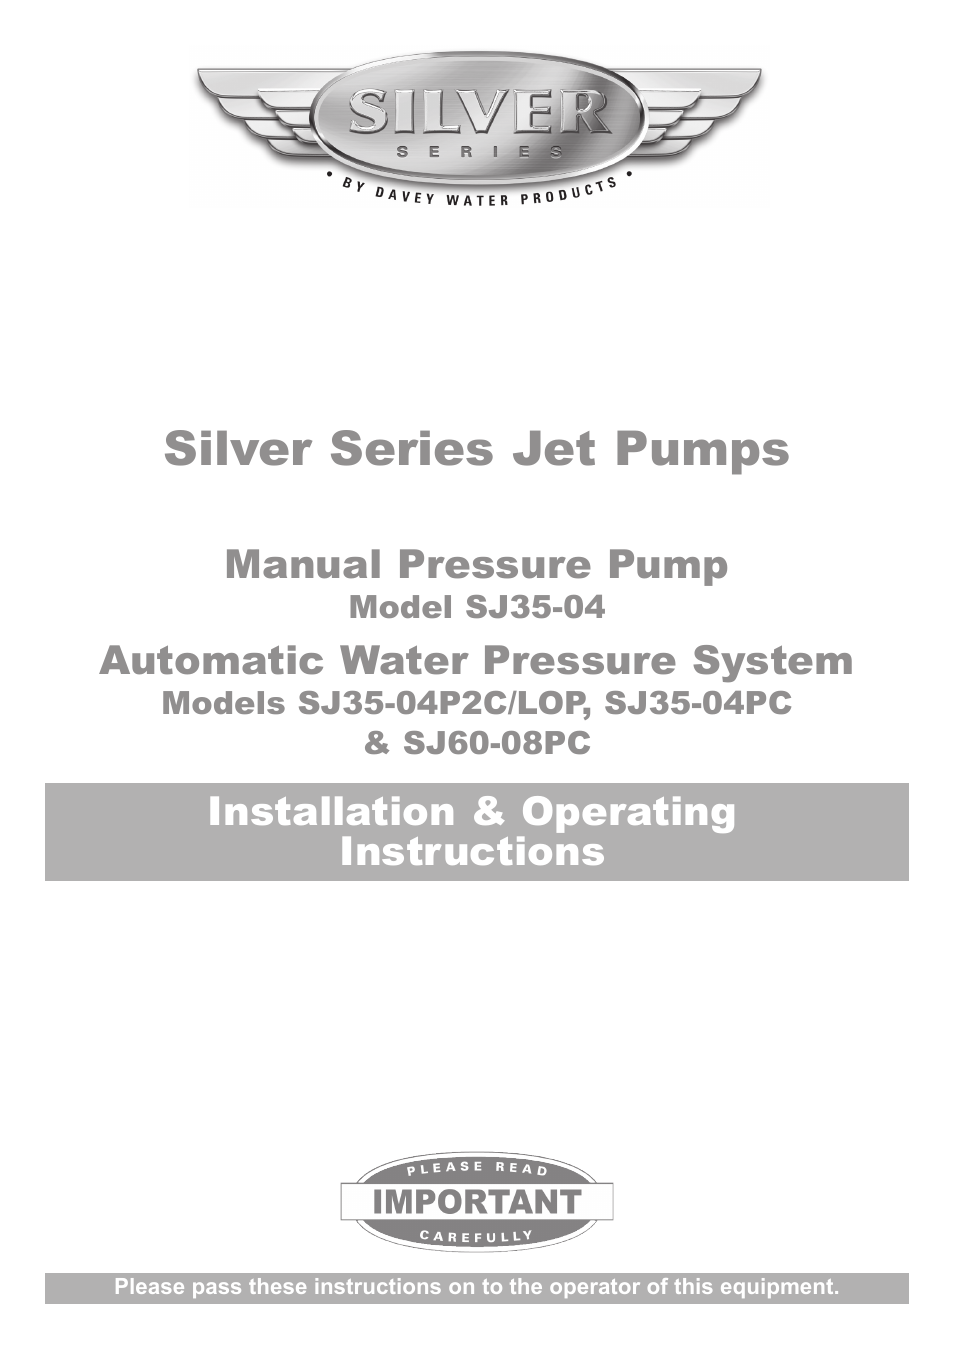 SJ35-04P2C/LOP Automatic Water Pressure System